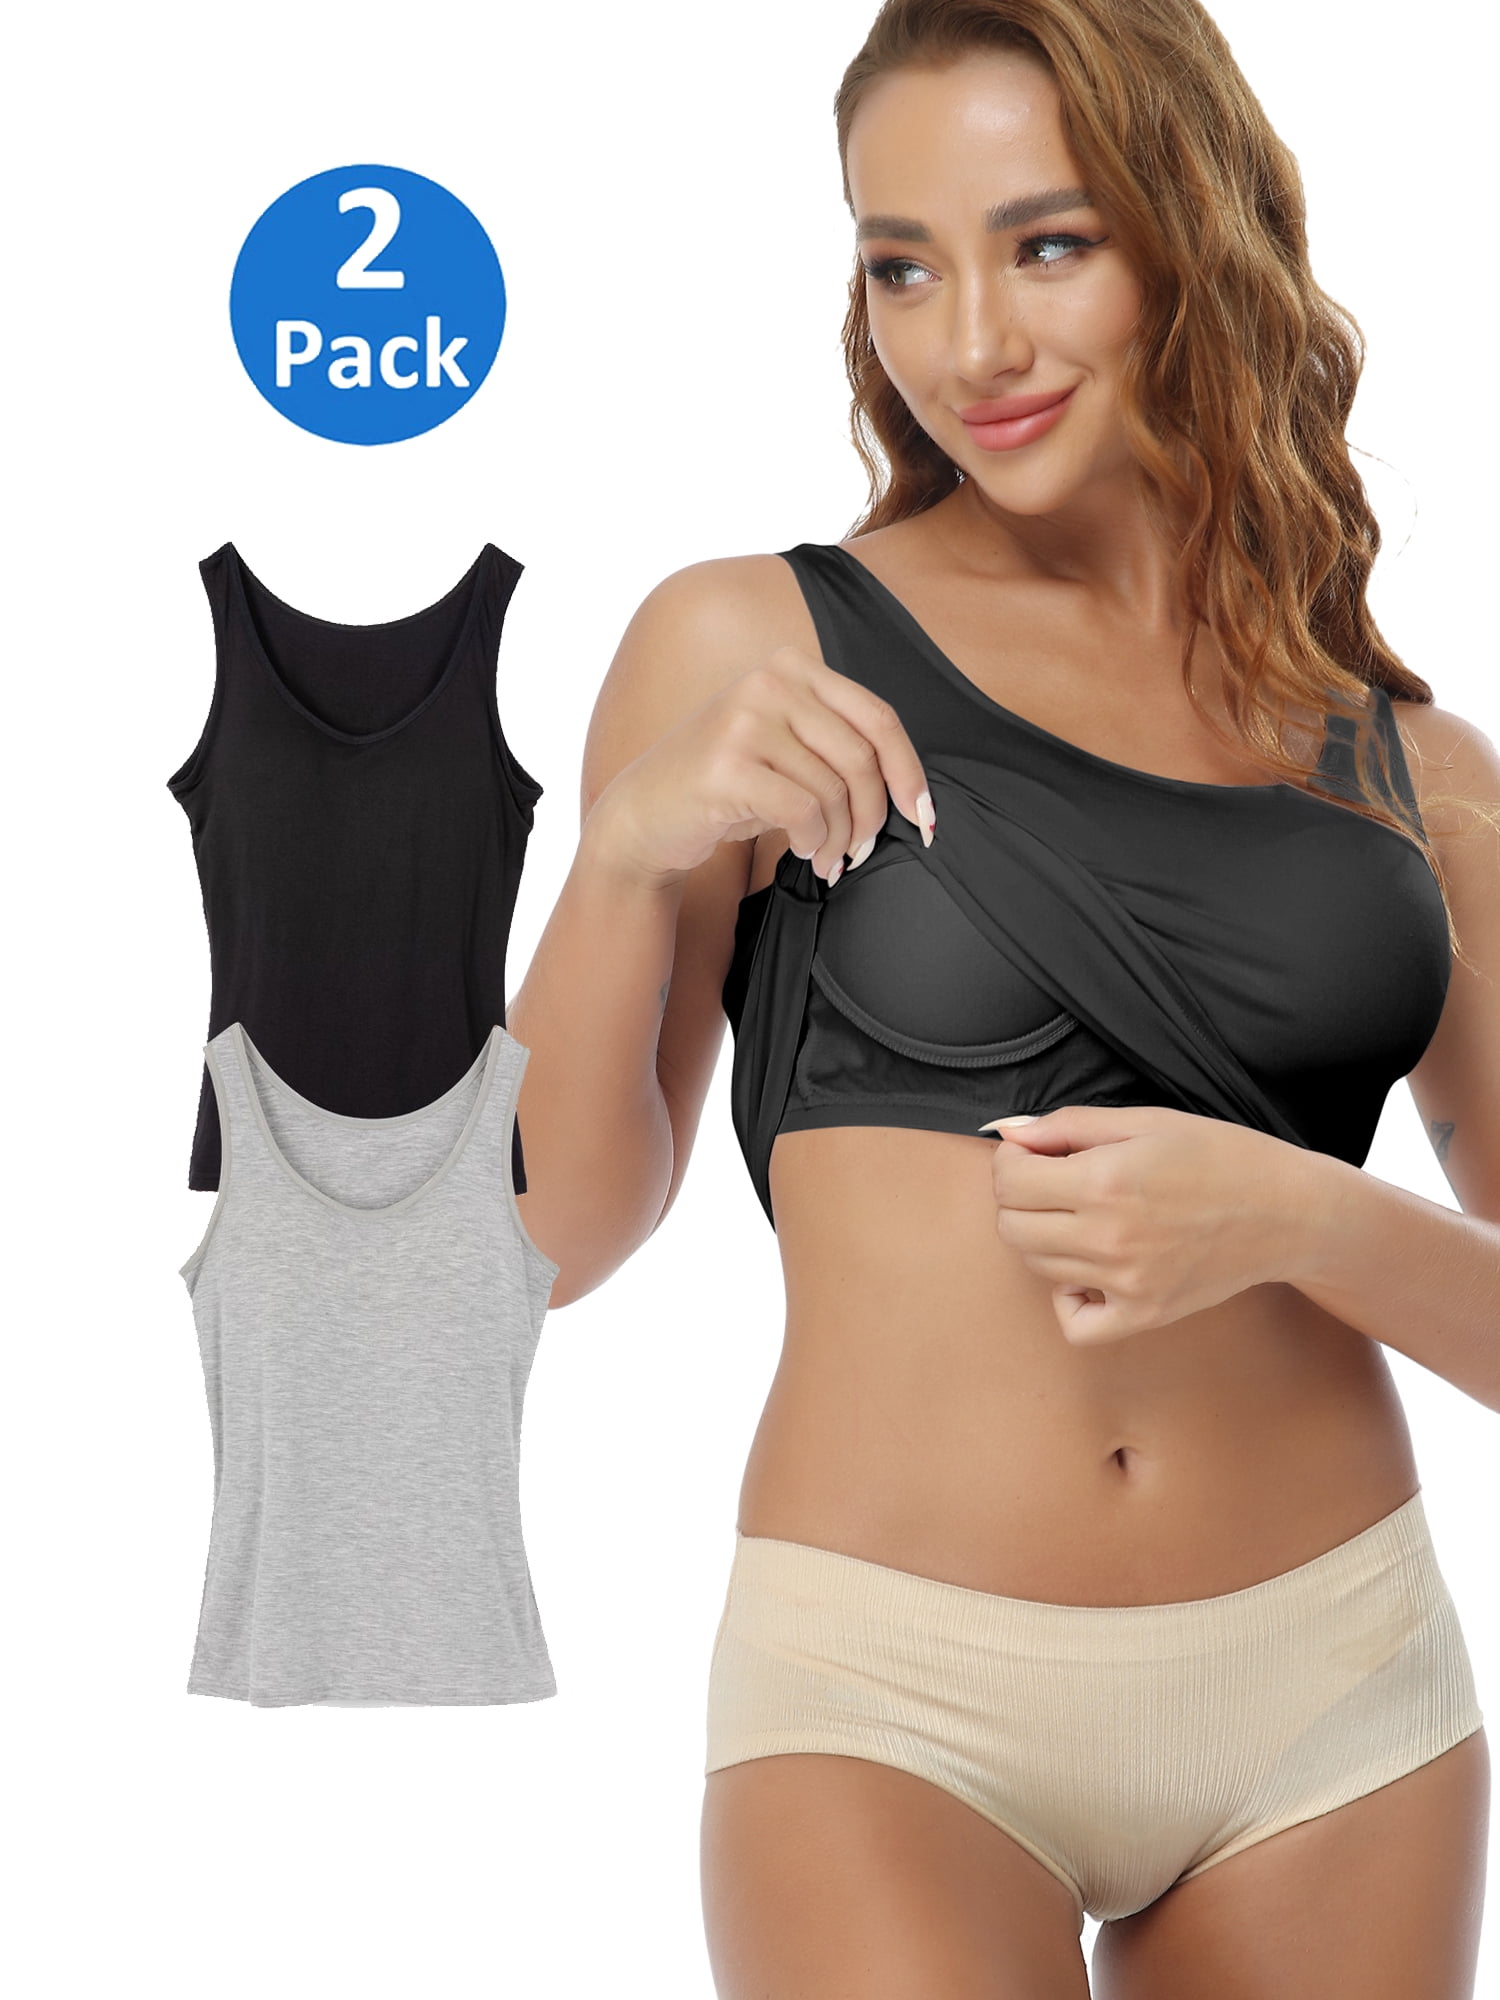 Pack Women's Camisole With Built In Bra Tank Tops For, 50% OFF